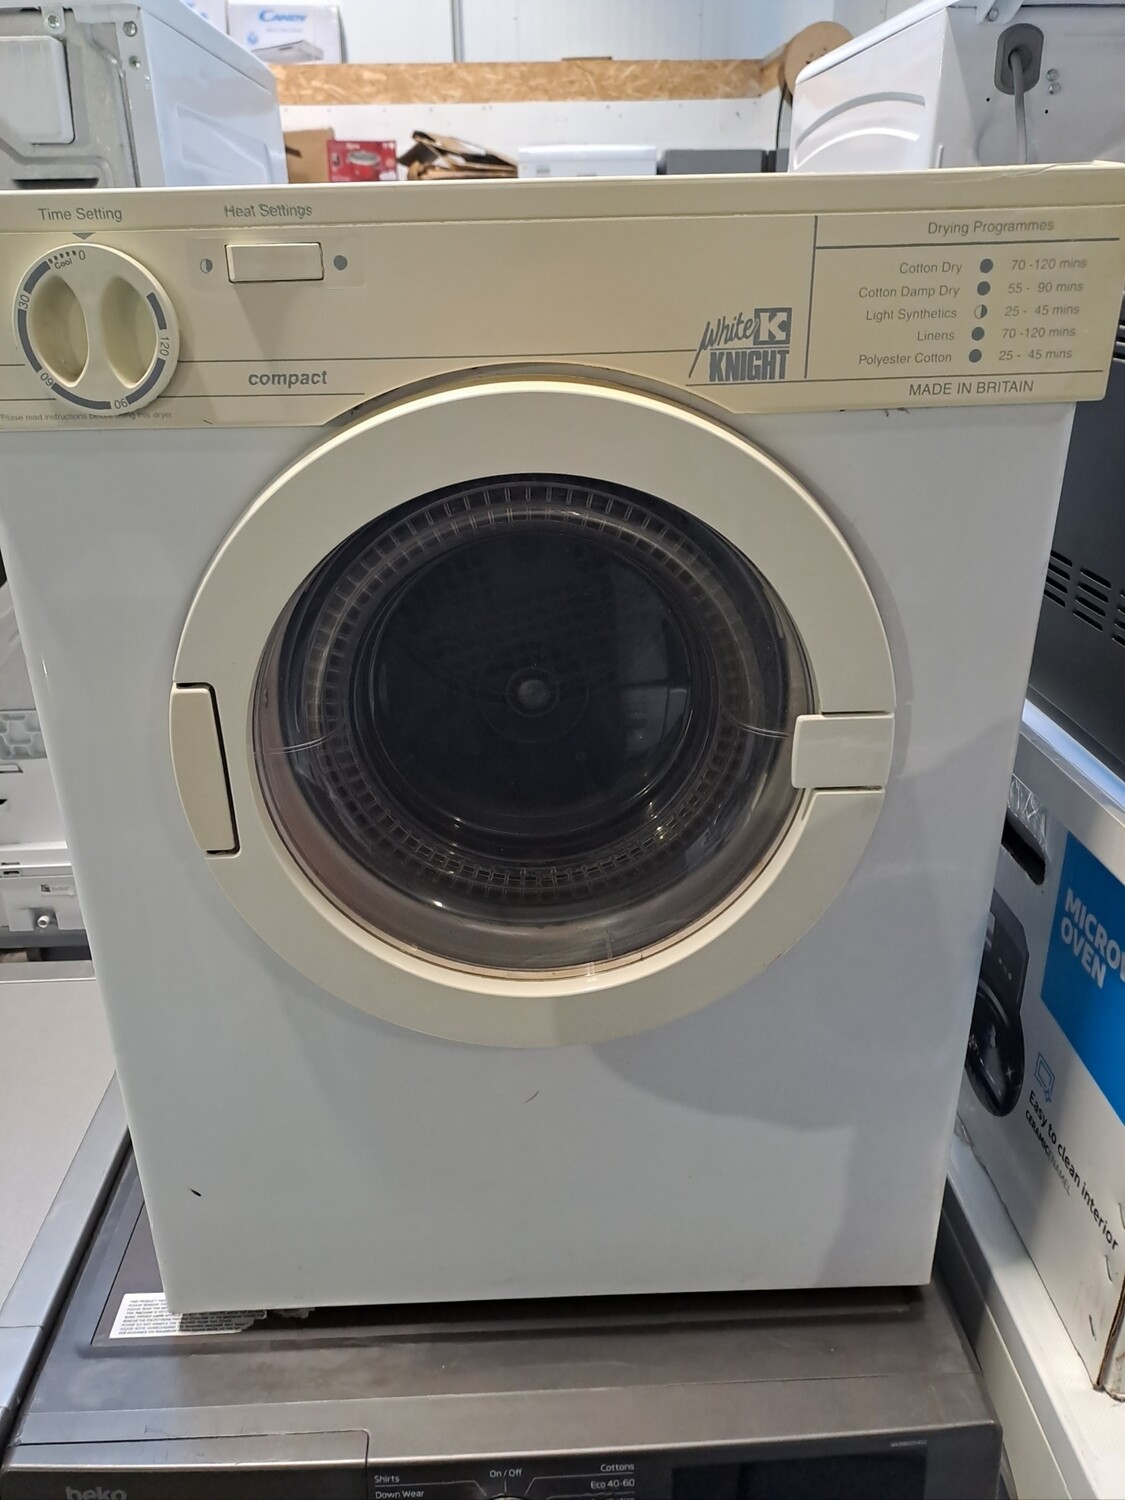 White Knight CL300 3KG Compact Tumble Dryer White Refurbished H67cm
W49cm
D48cm 3 Months Guarantee